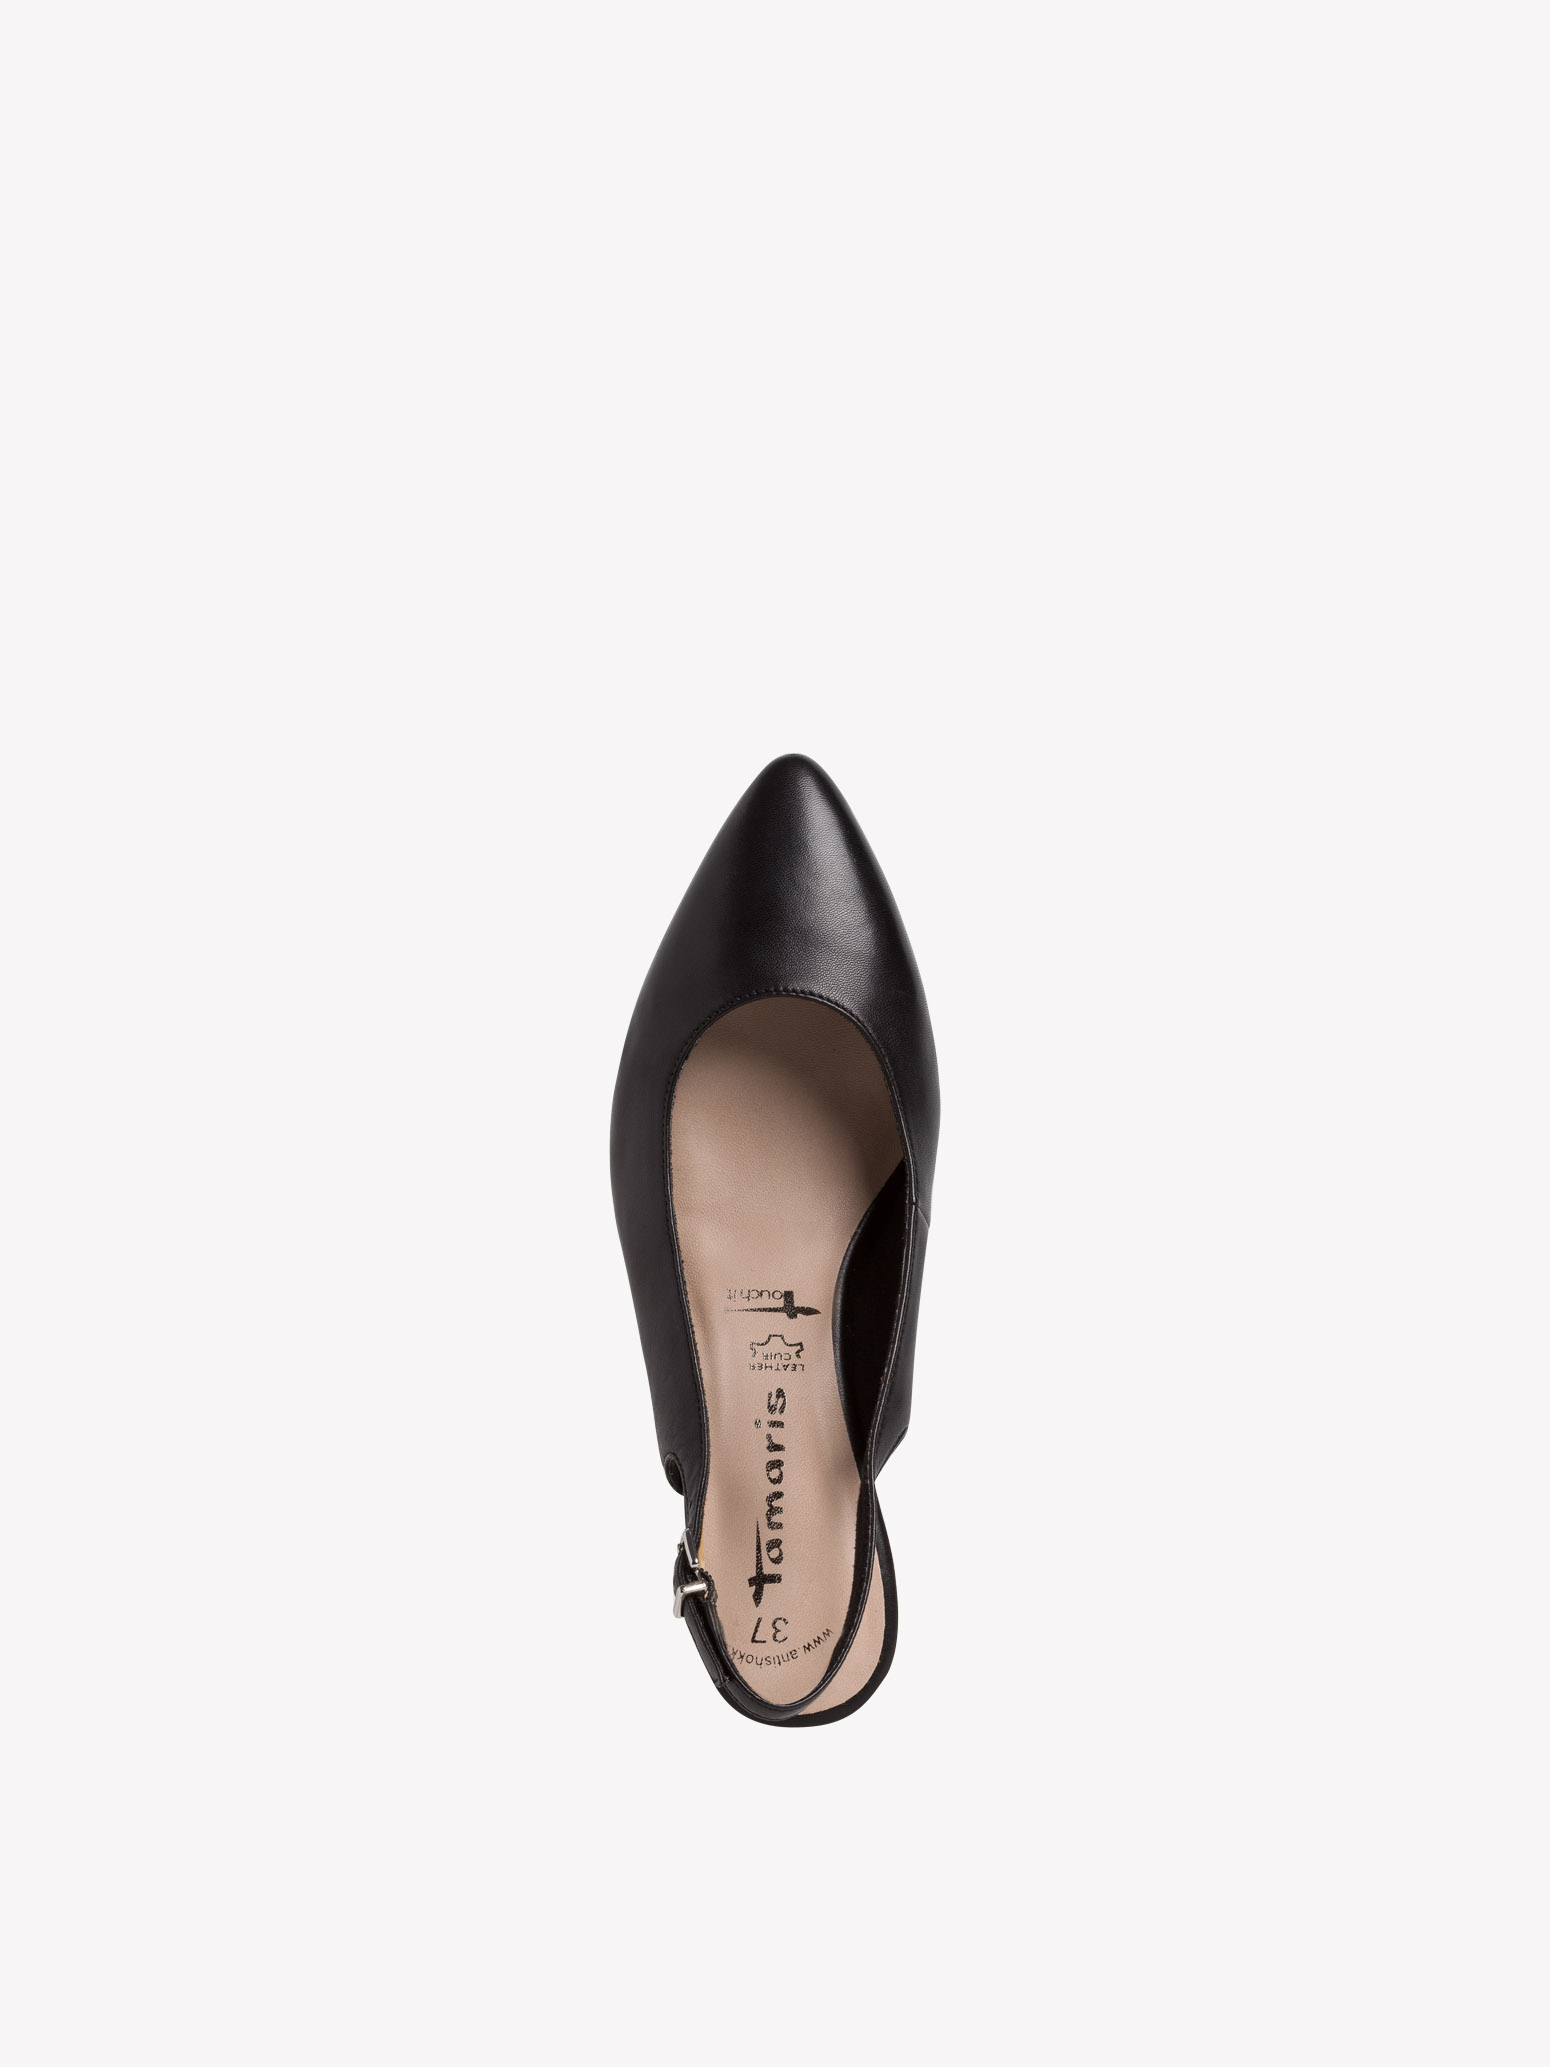 Leather sling pumps 1-1-29611-24: Buy 